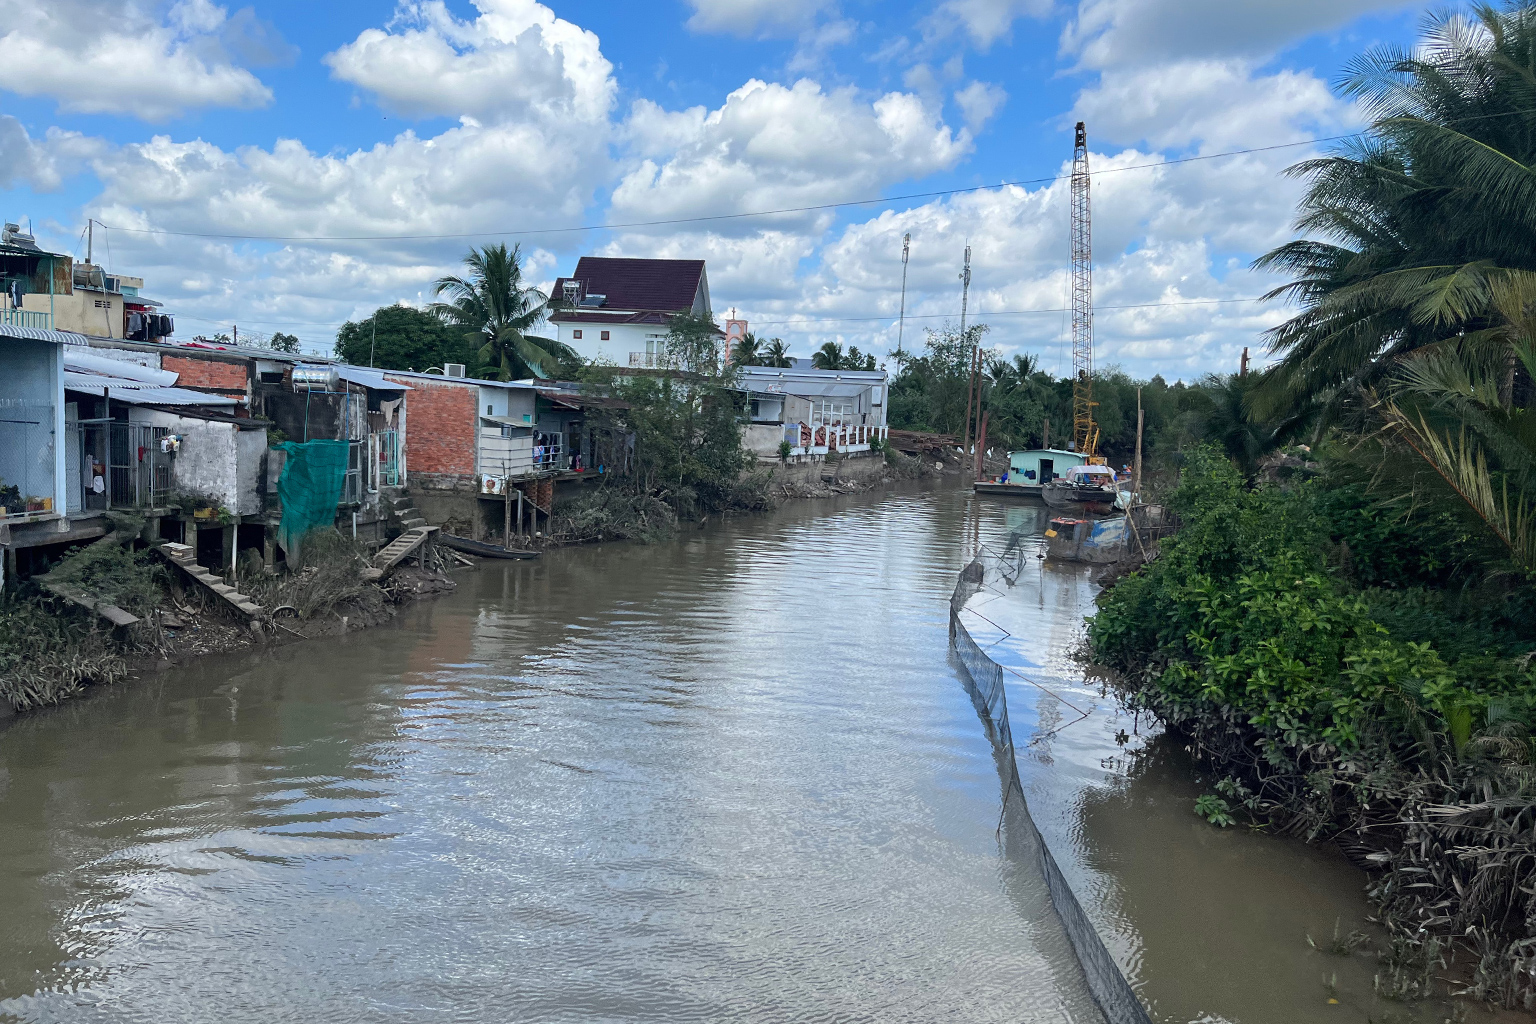 Houses and businesses line the banks of dikes and rivers in the Mekong delta in Vietnam.